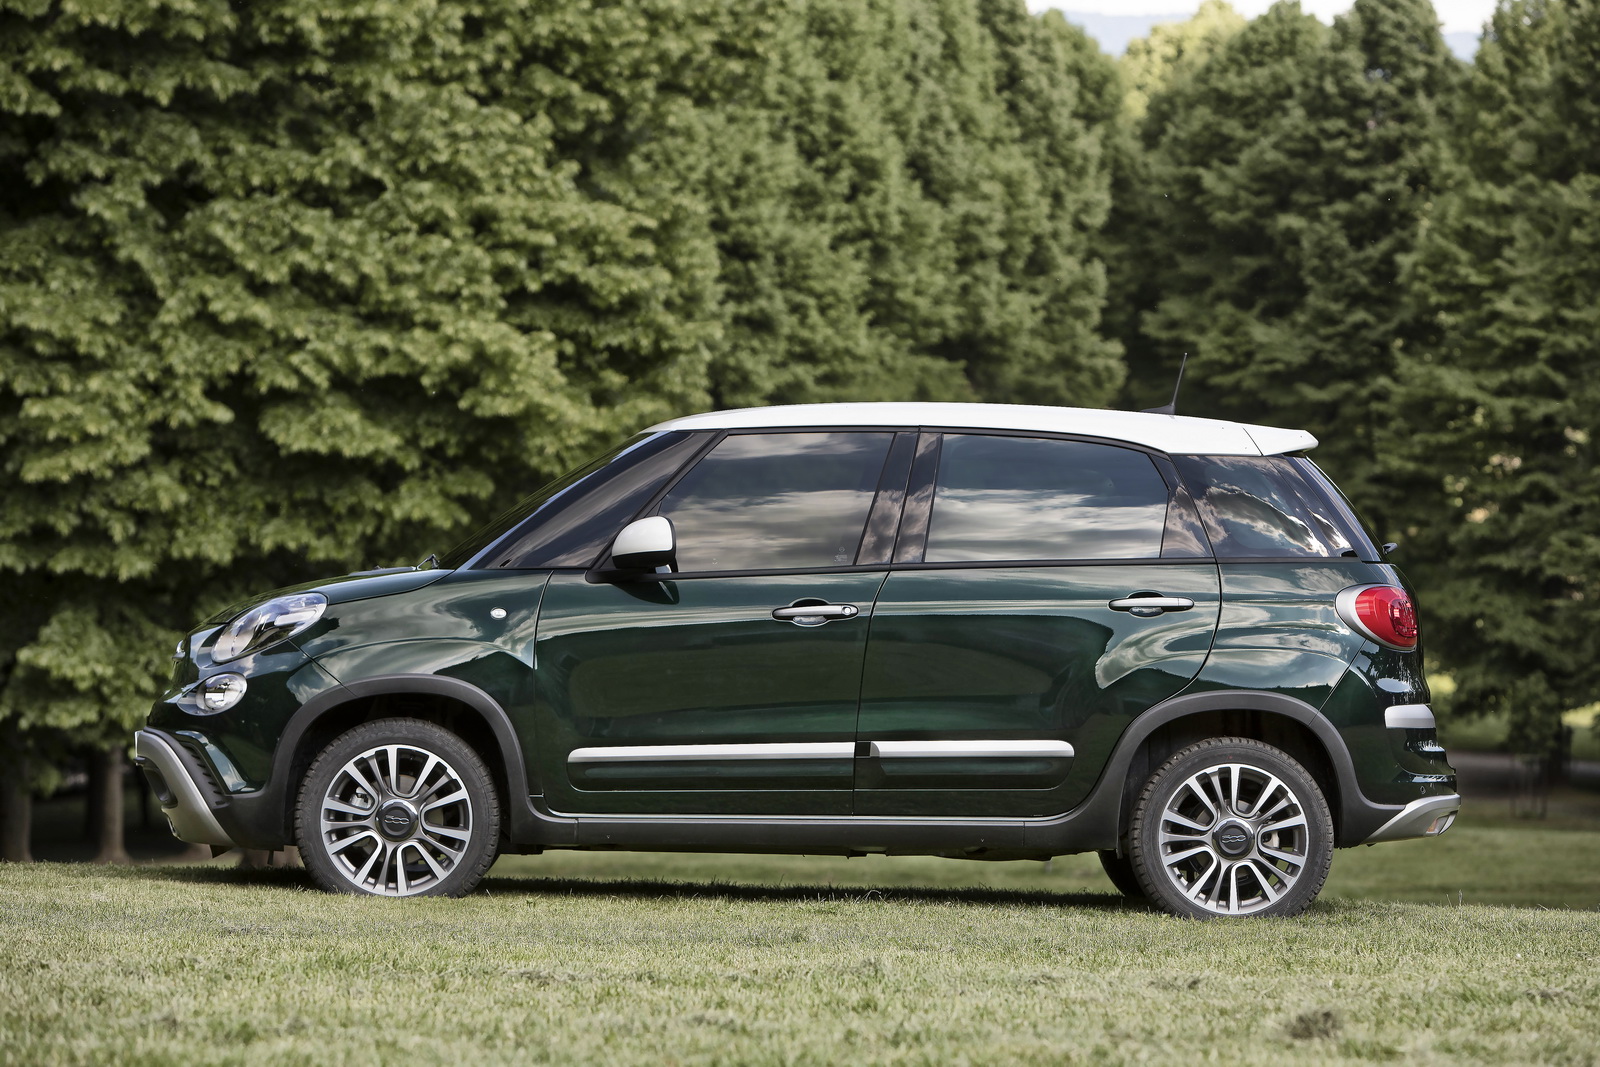 Fiat Updates 2017 500L With 40 Percent New Parts And Three